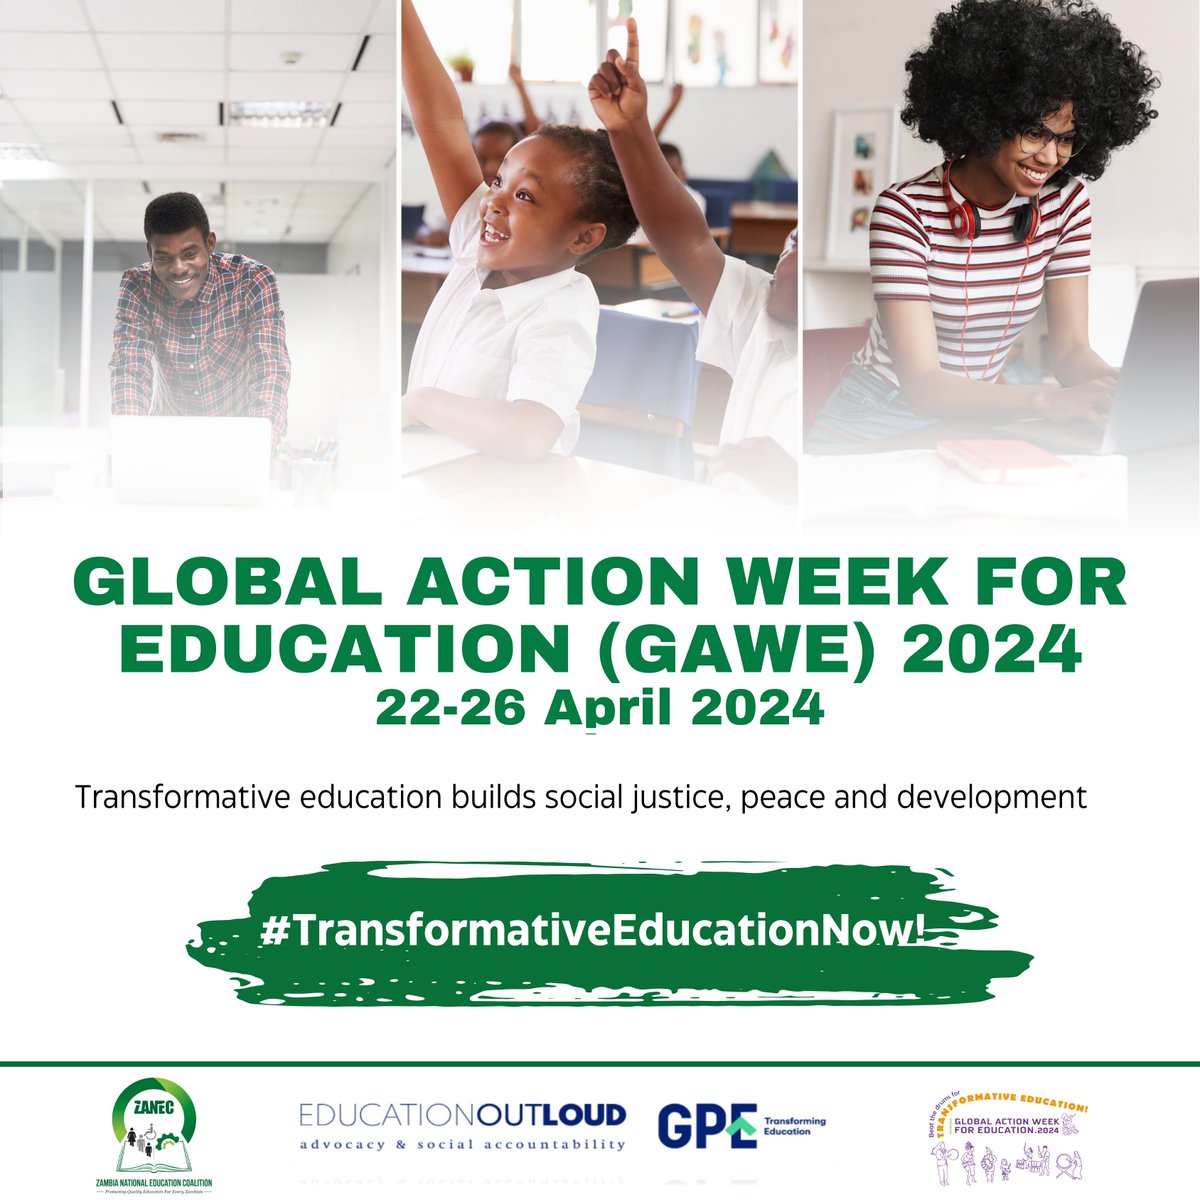 Global Action Week for Education (GAWE) 2024 is just around the corner (22-26 Apr)! Let’s unite & beat the drums for transformative education during the week-long celebrations, & beyond. Let our voices be heard! #TransformativeEducationNow #EducationForAll #NoOneLeftBehind